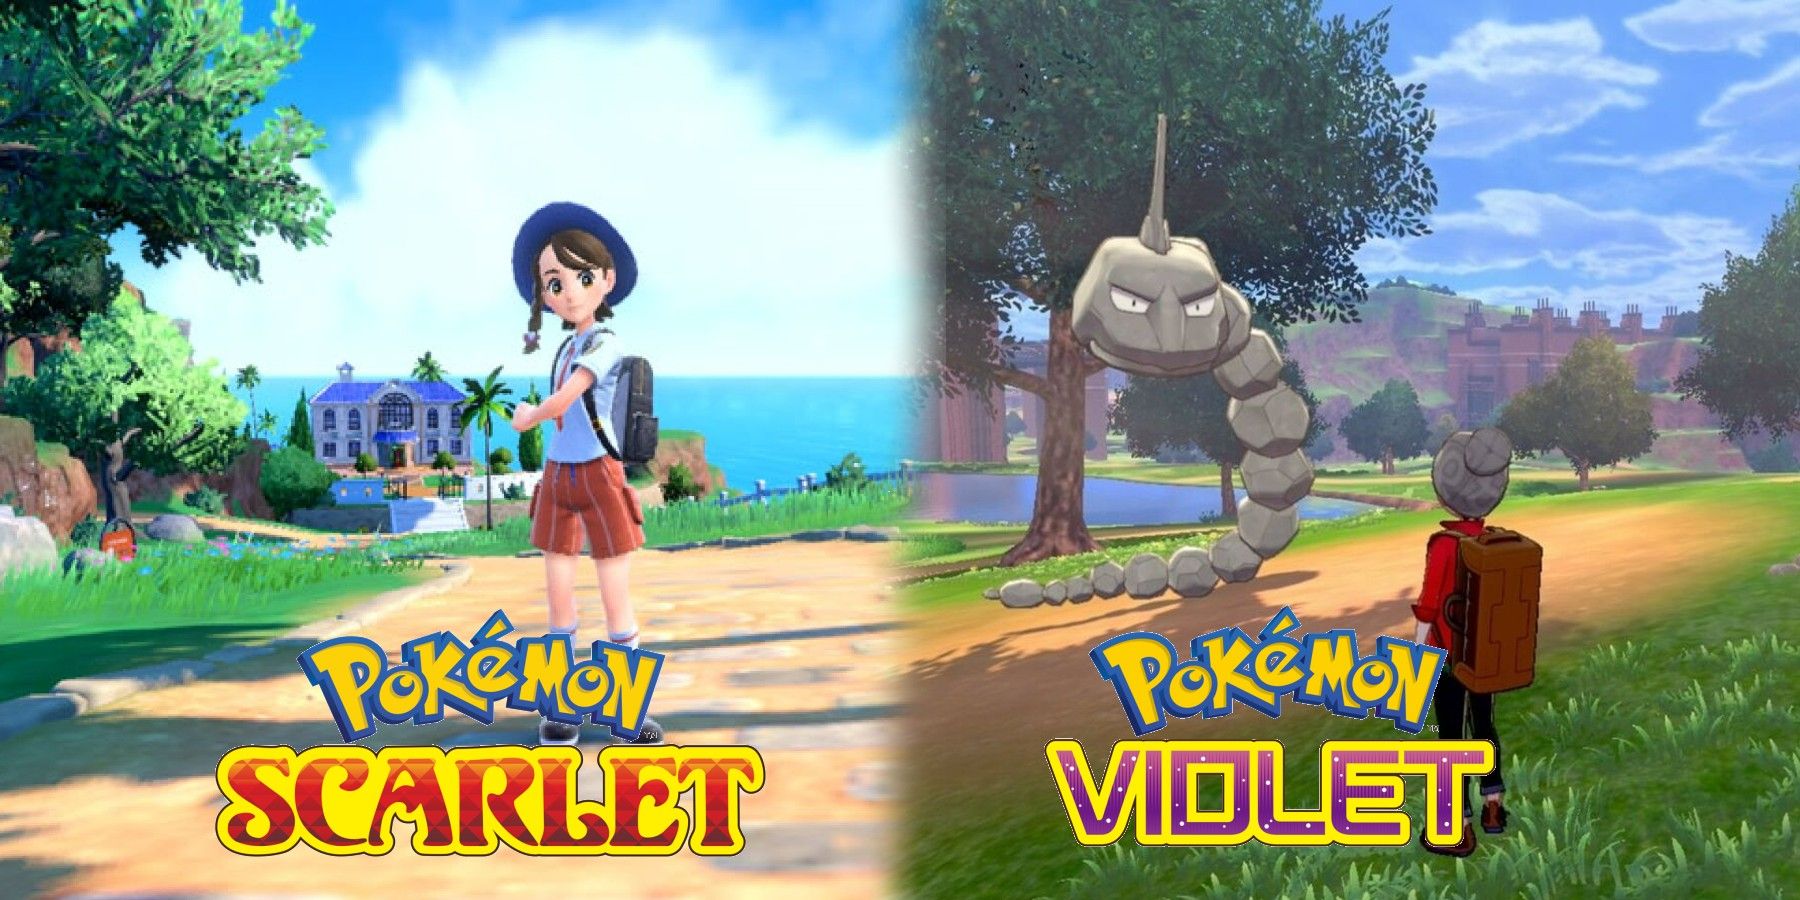 Pokemon Scarlet and Violet COULD BE EVERYTHING Sword & Shield SHOULD Have  Been! 